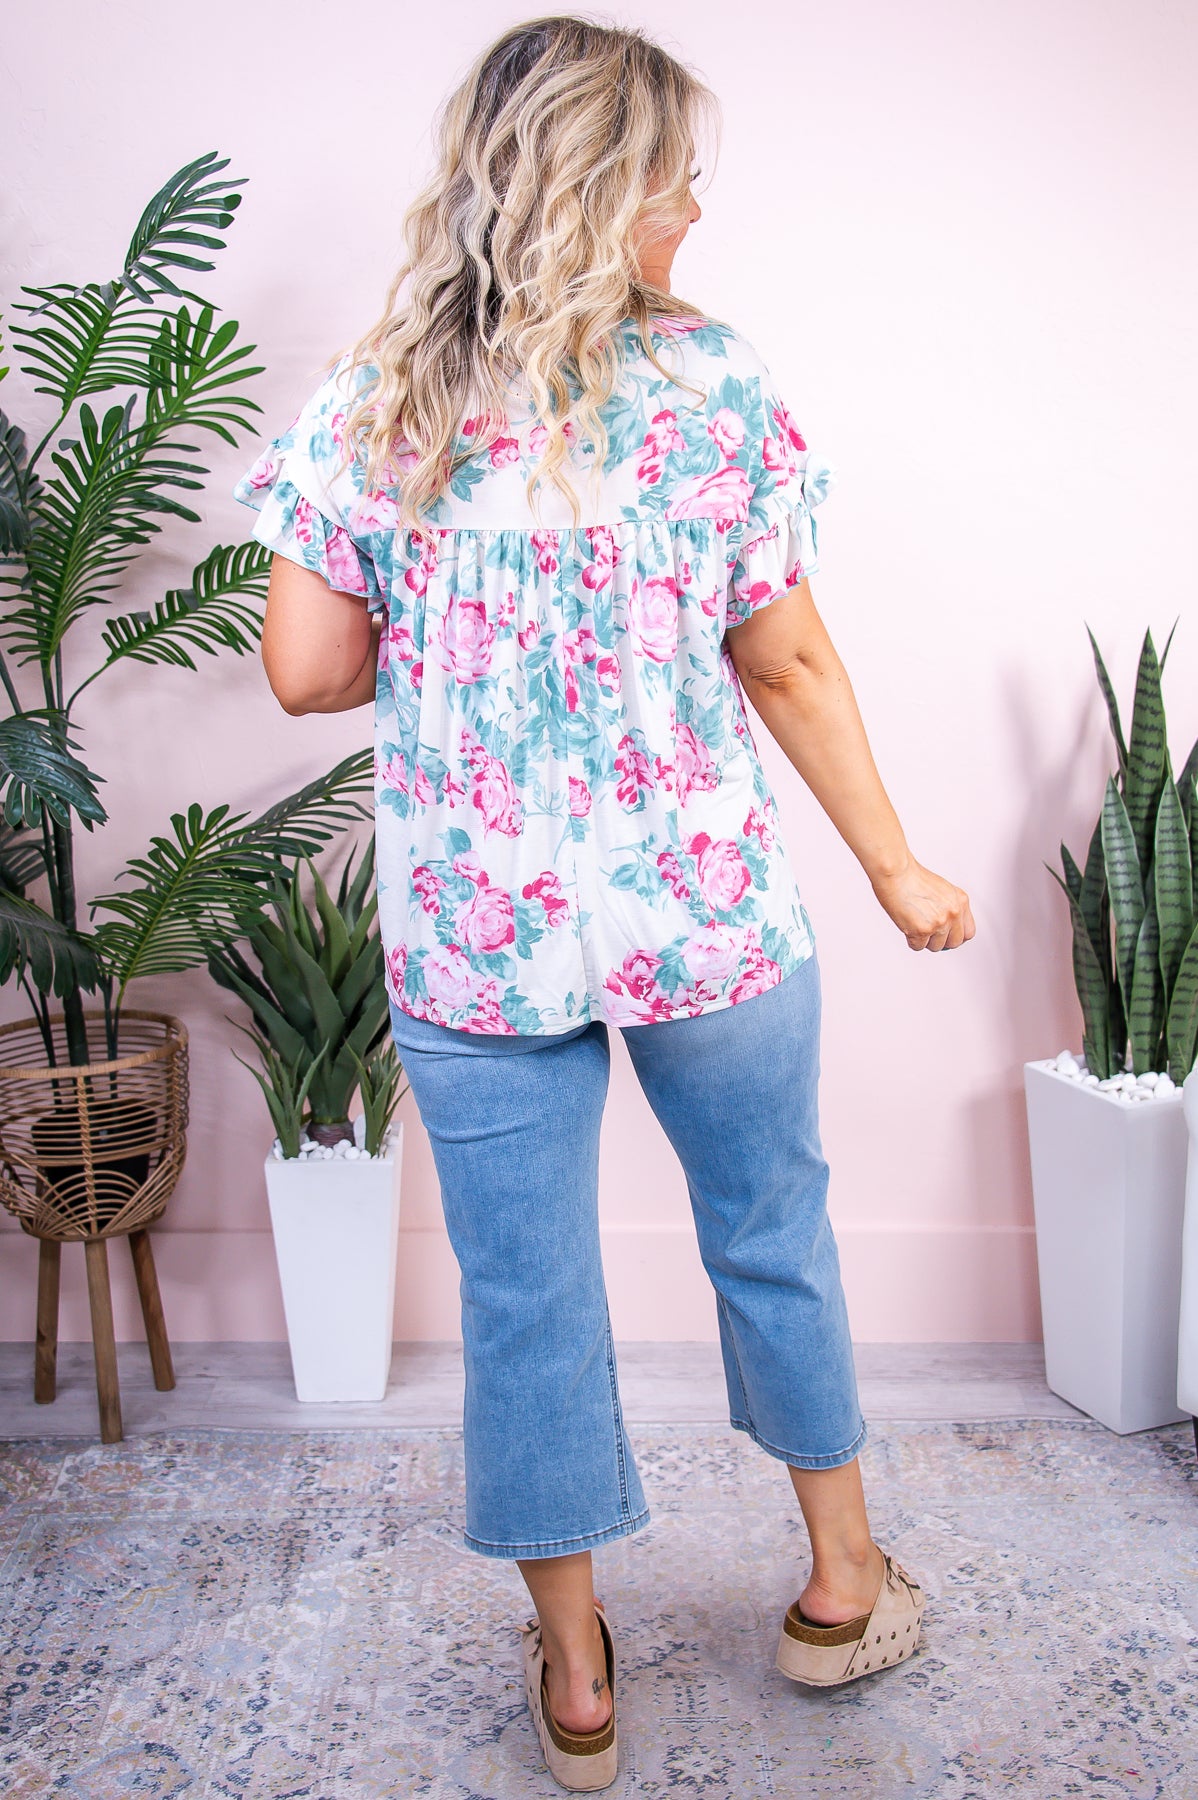 Enjoying The Day Pink/Multi Color Floral Top - T9520PK